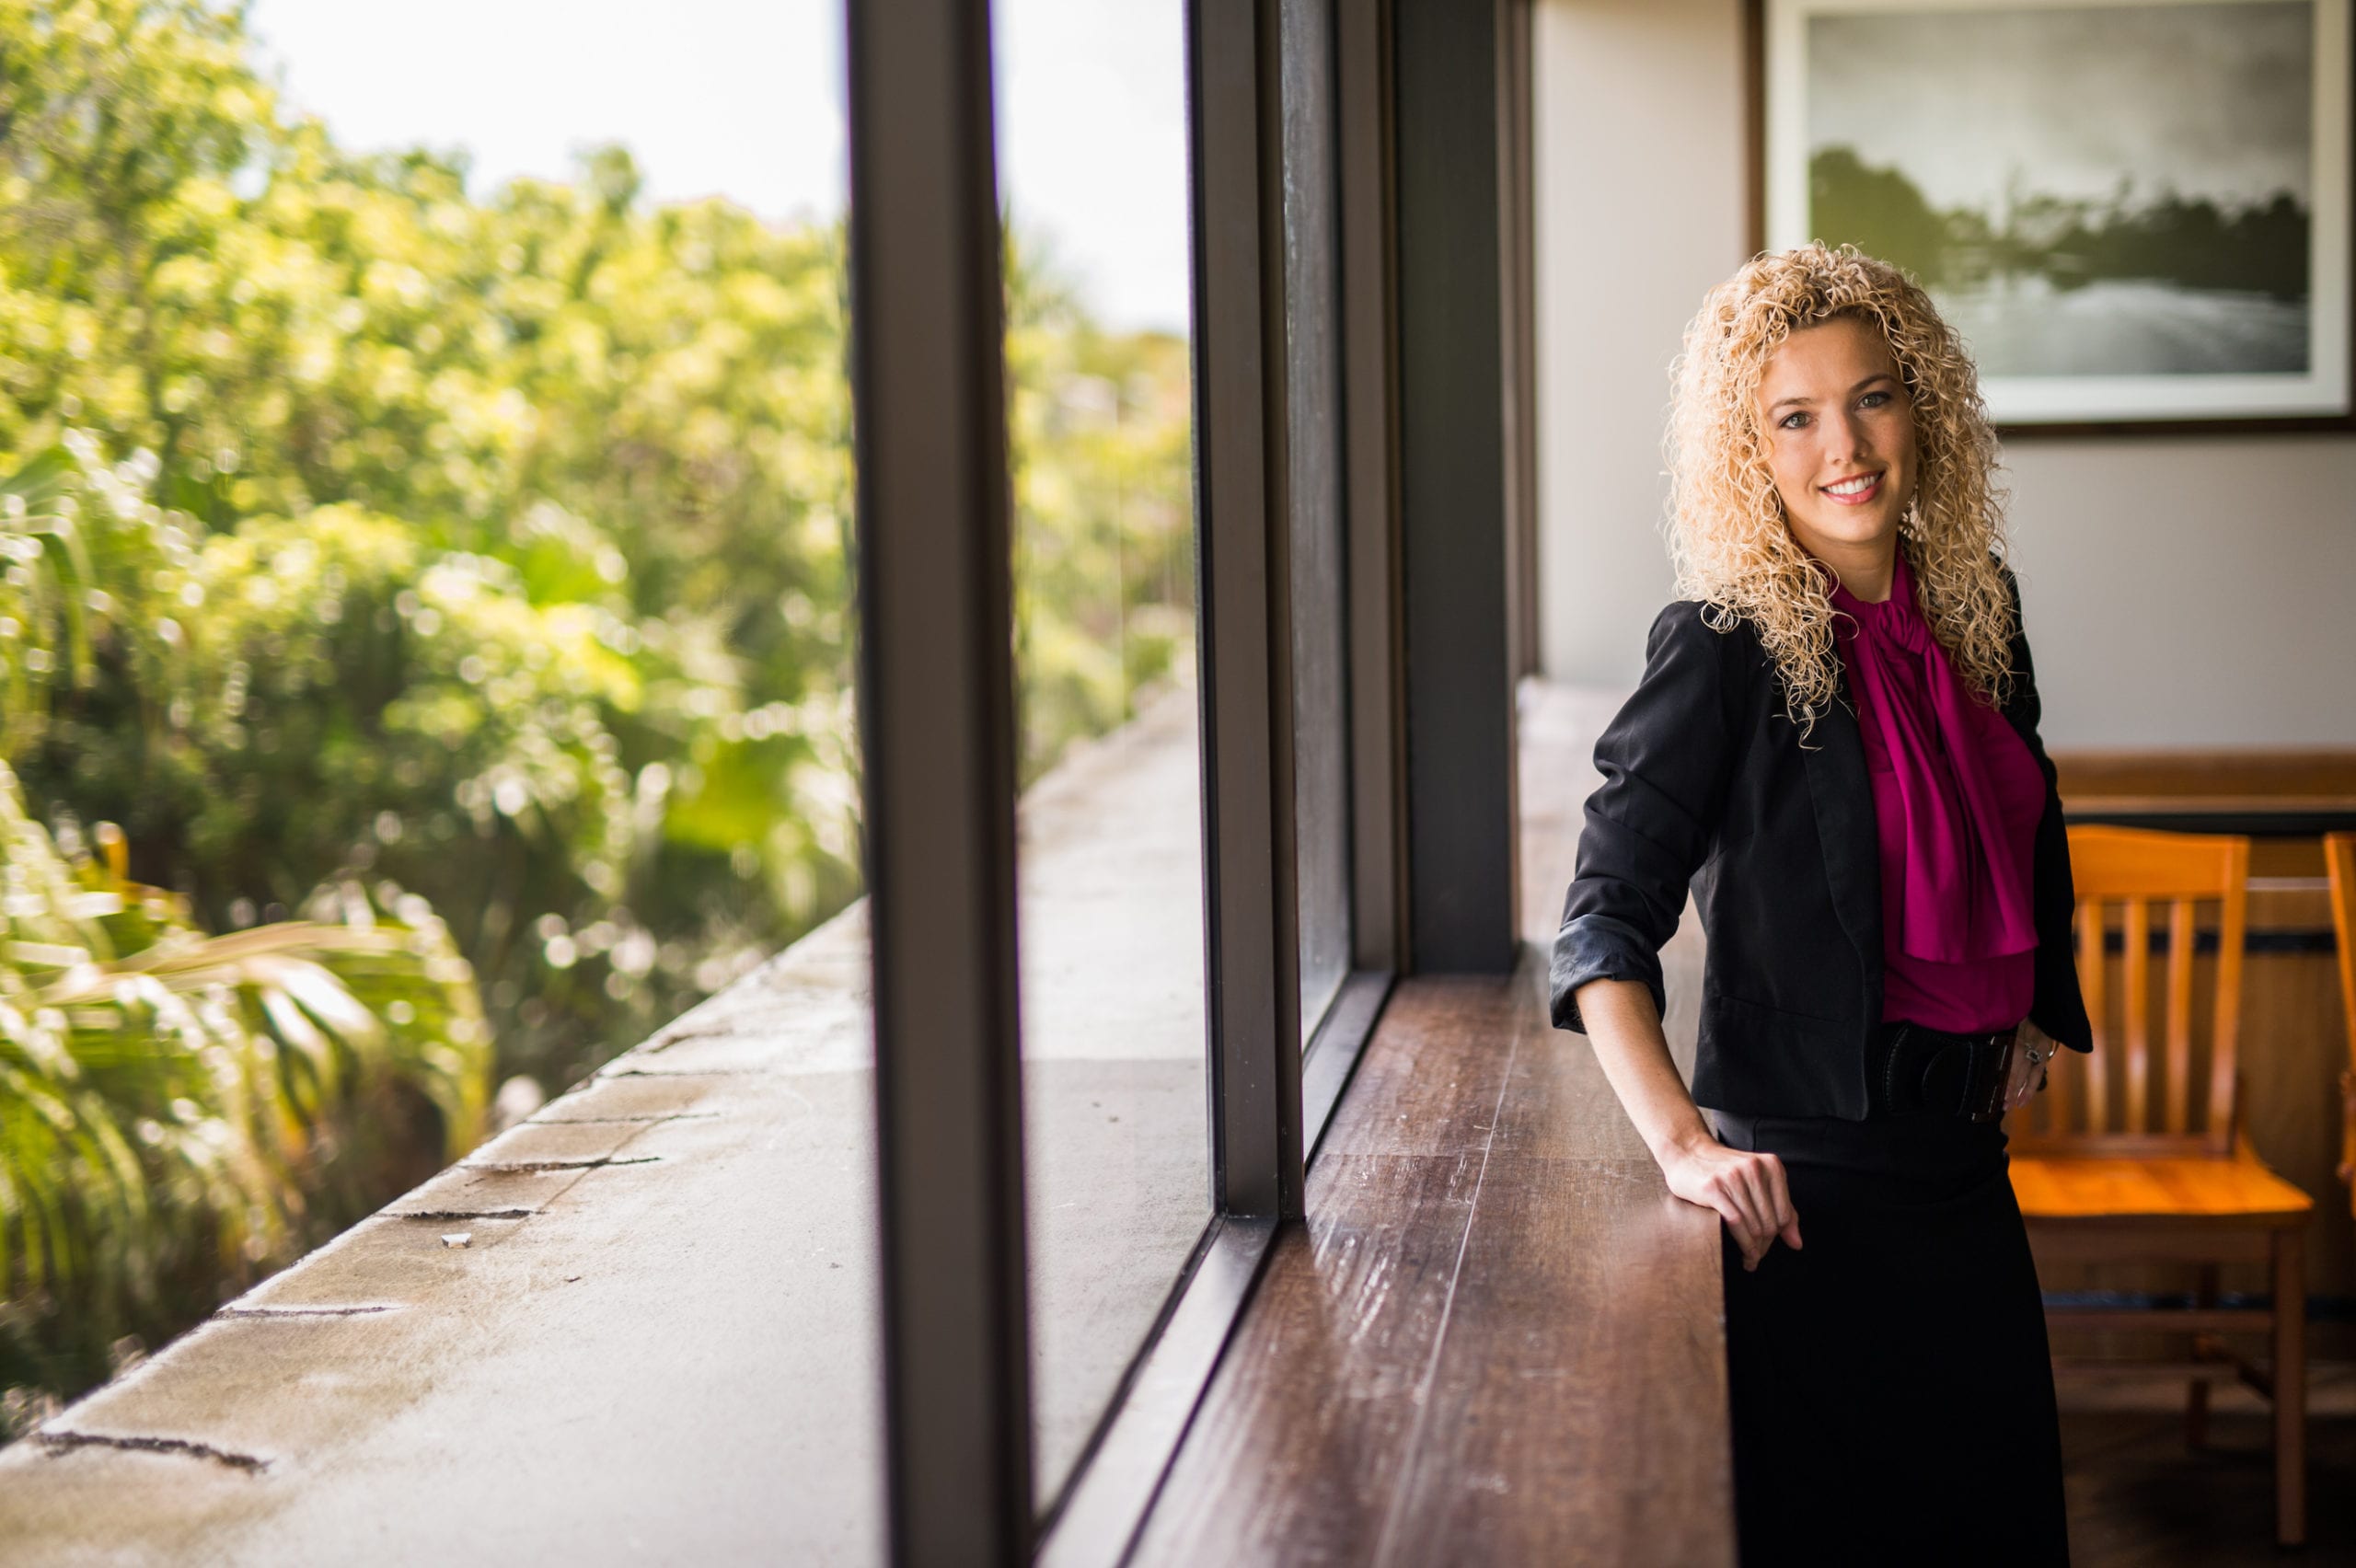 Kelley & Uustal Trial Attorneys Female attorney with curly blond hair leaning on a window sill smiling and posing for camera